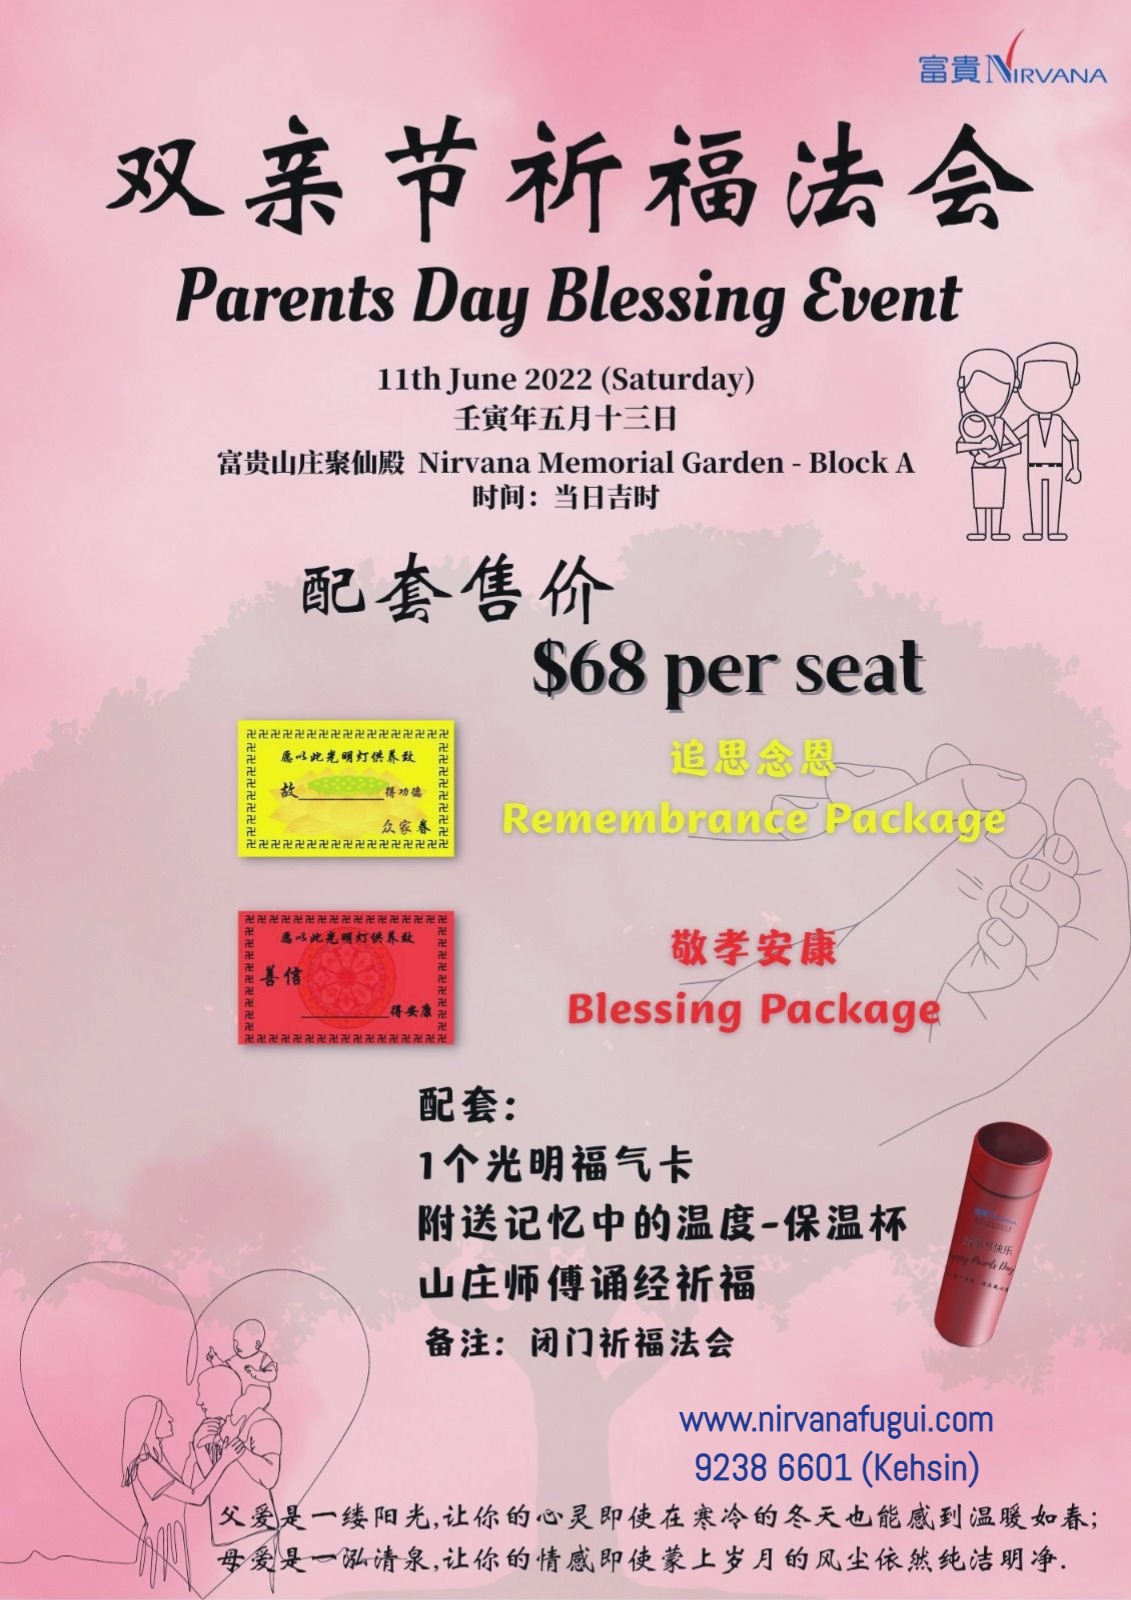 You are currently viewing Parents Day Blessing Event 2022 at Nirvana Singapore